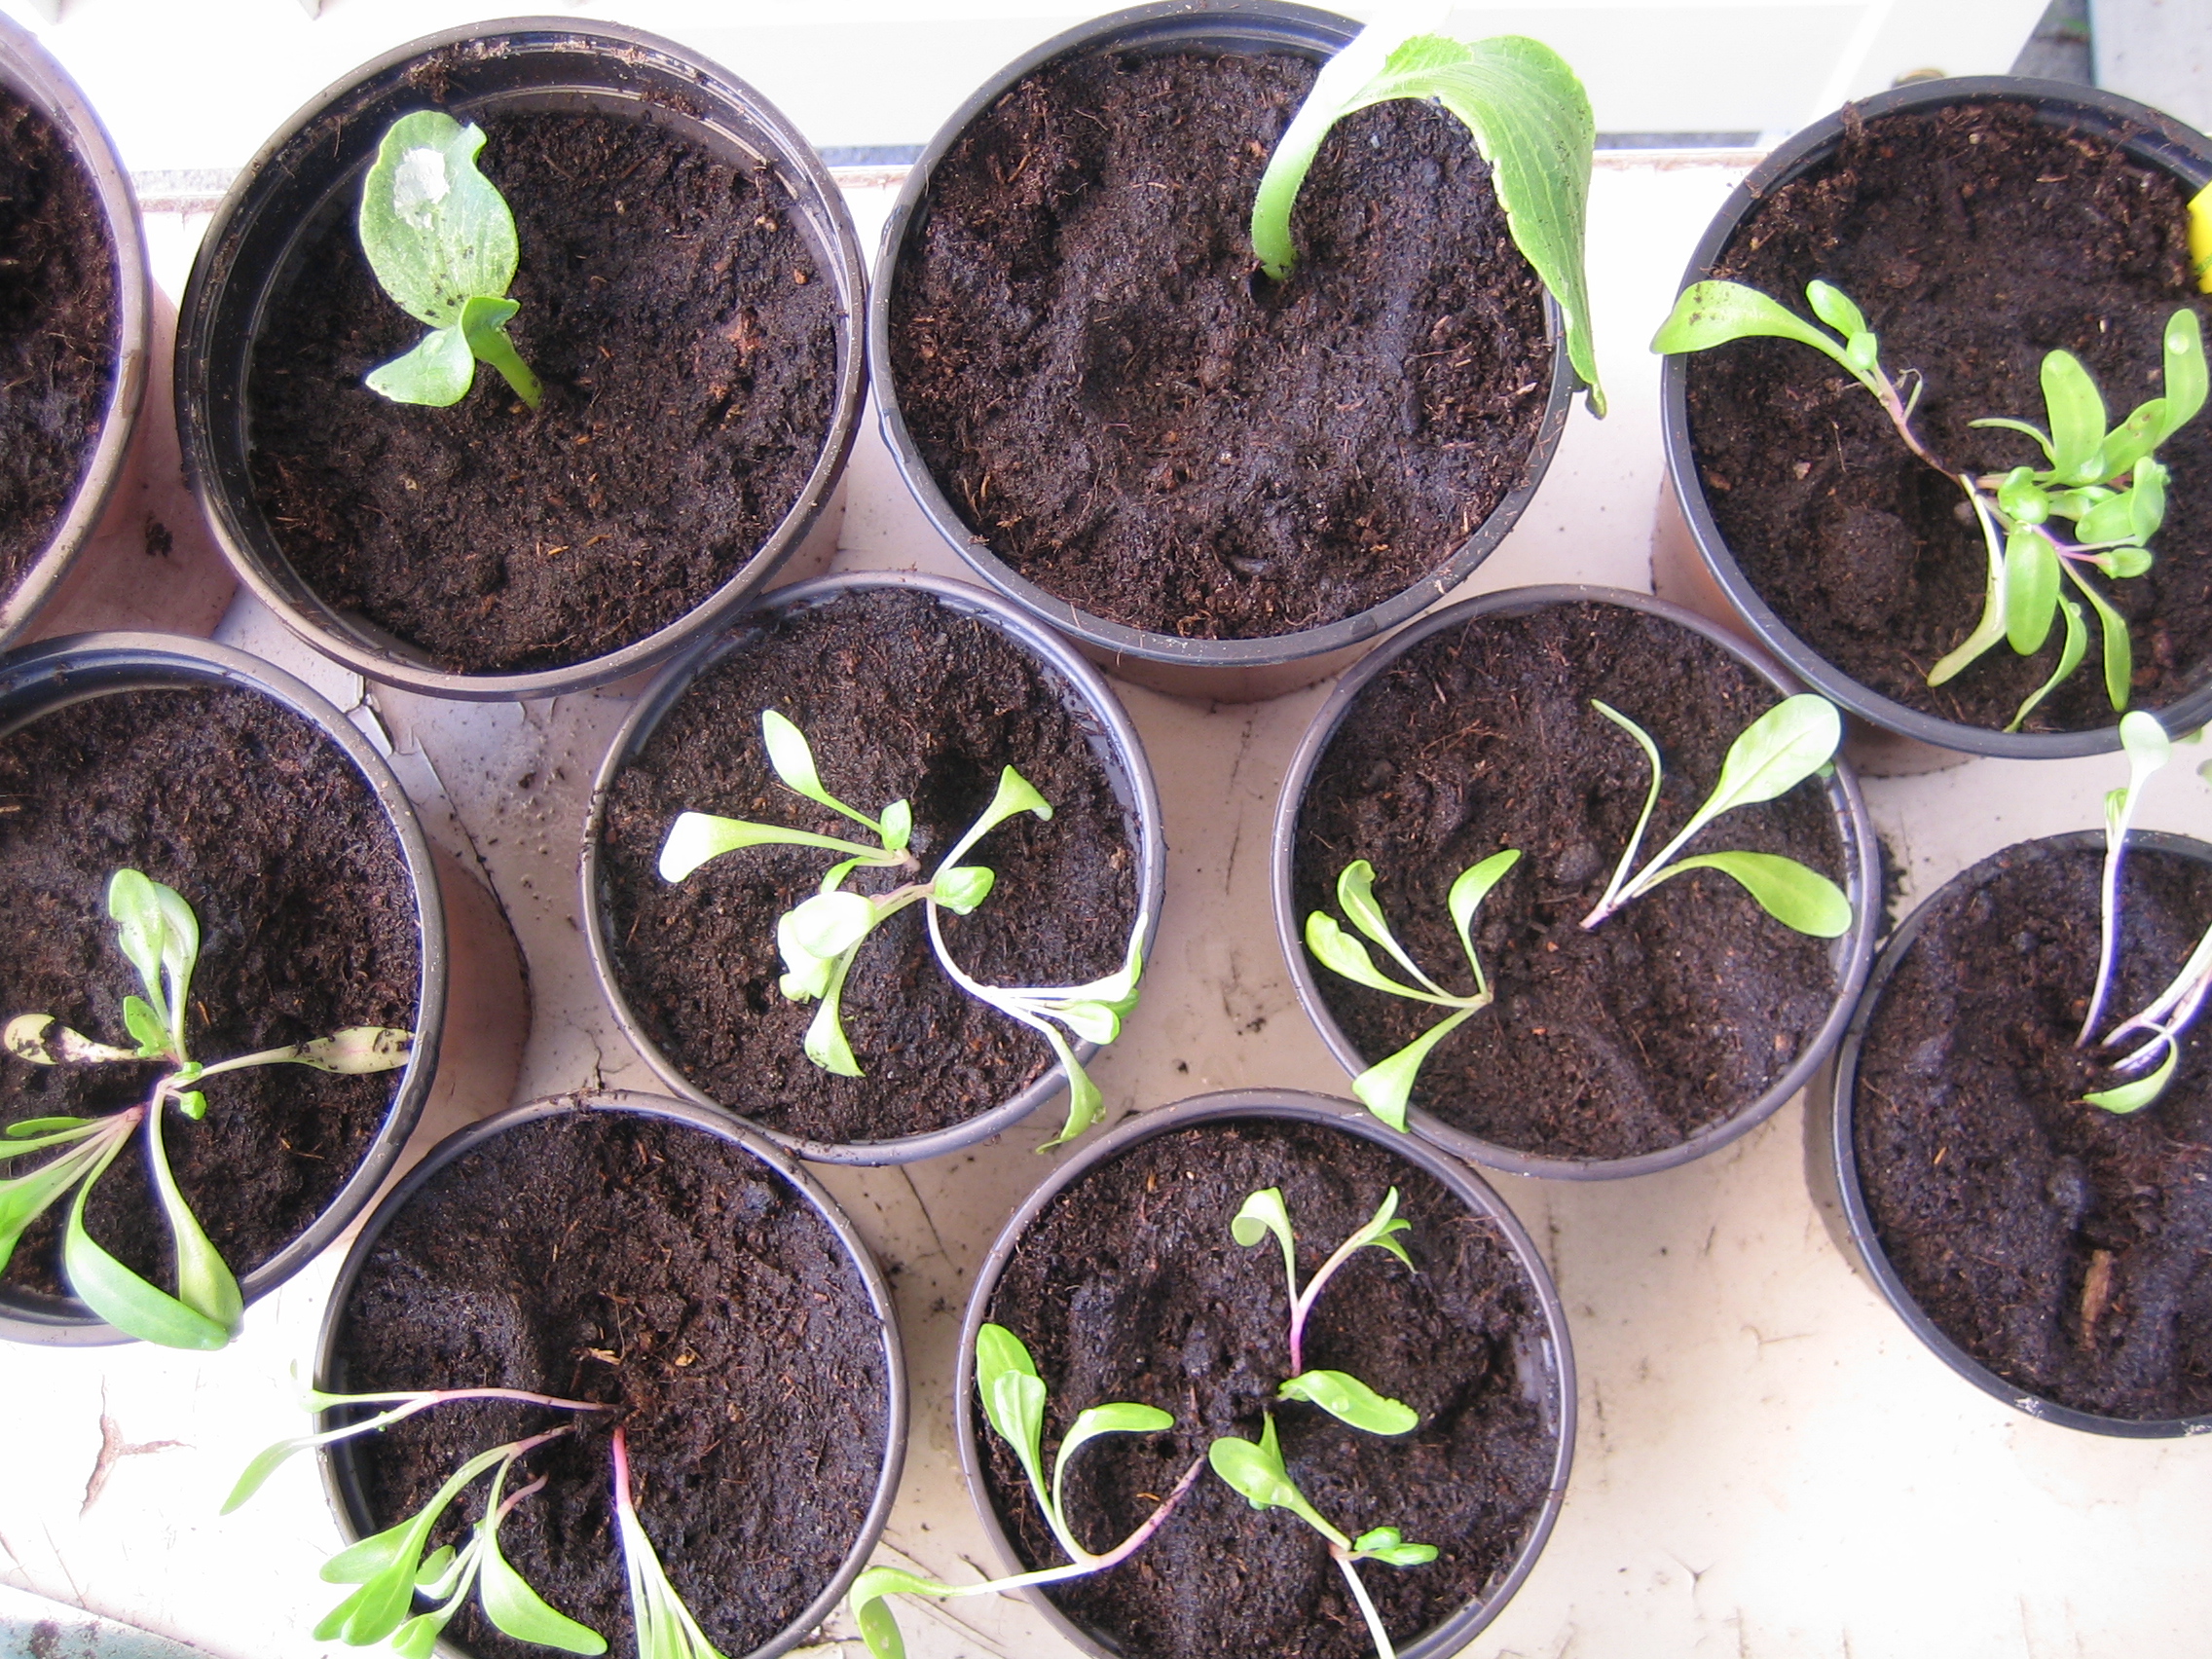 my urban farming – growing from seeds